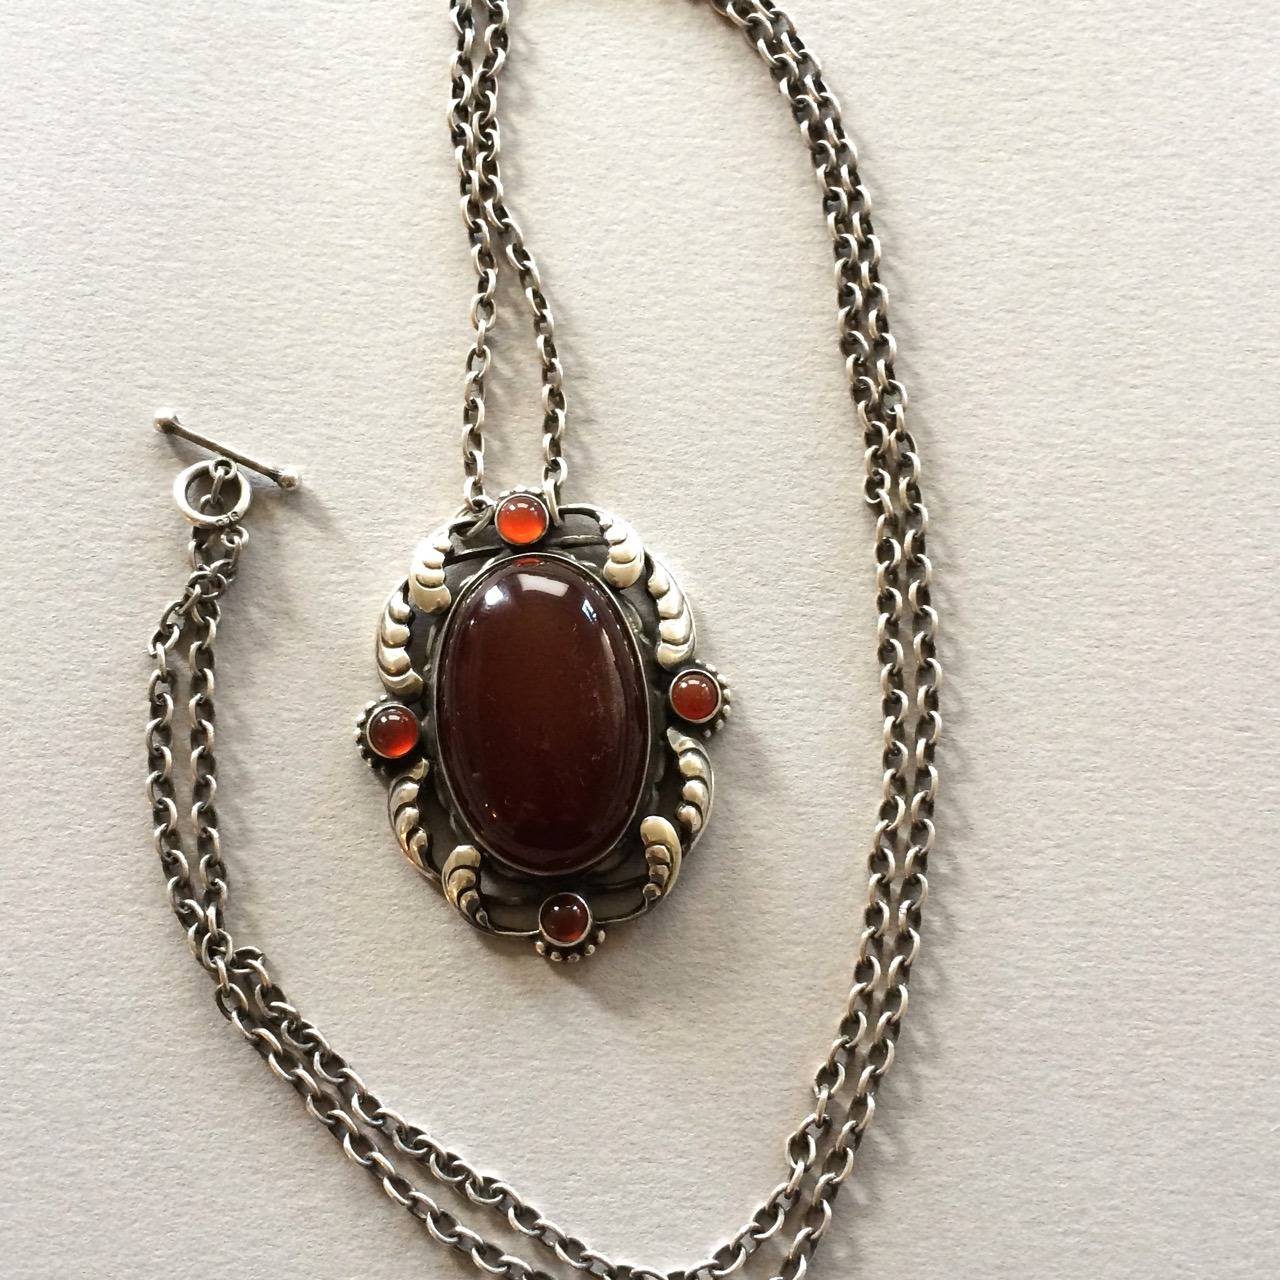 Georg Jensen Pendant No. 158 With Carnelian.

A very rare piece. 

Large deep colored carnelian cabochon center stone flanked with 4 lighter stones. Intricate Foliate design. 29 inch original chain with toggle clasp.

Measures:	2